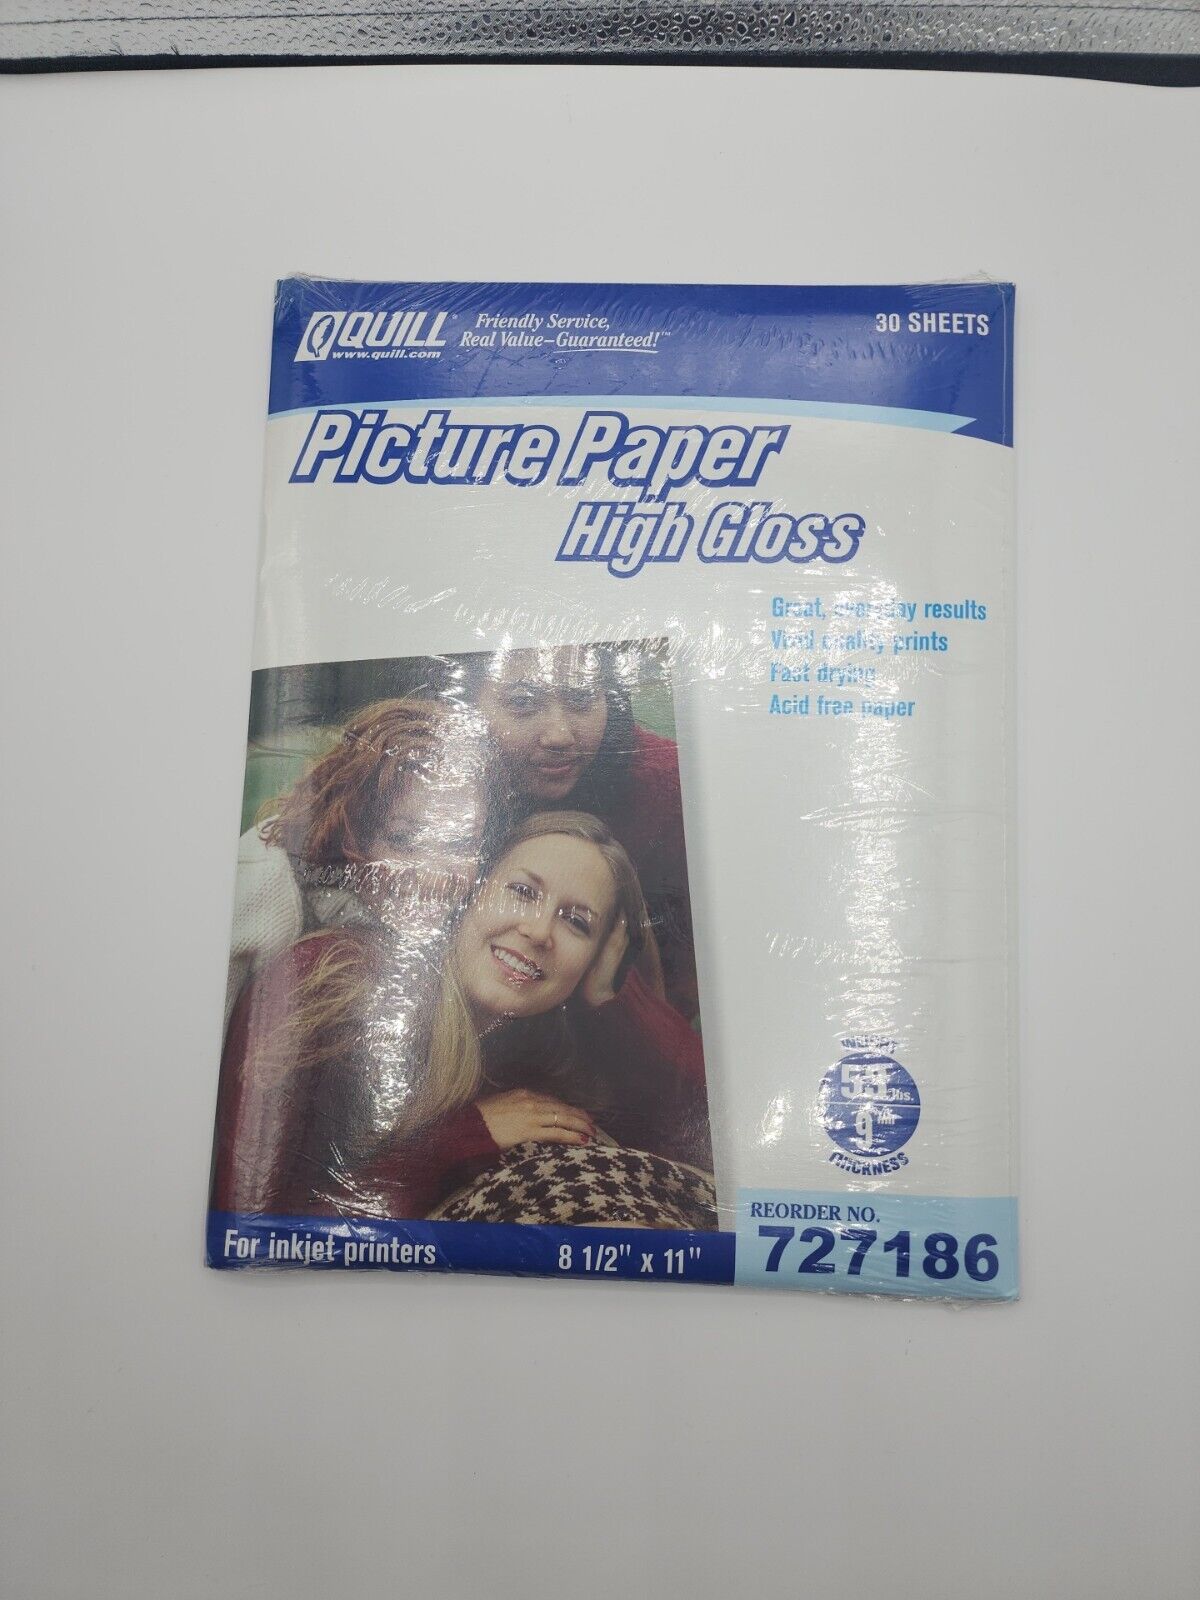 Quill Picture Paper High Gloss 30 Sheets New 8 1/2 X 11 For ink jet printers